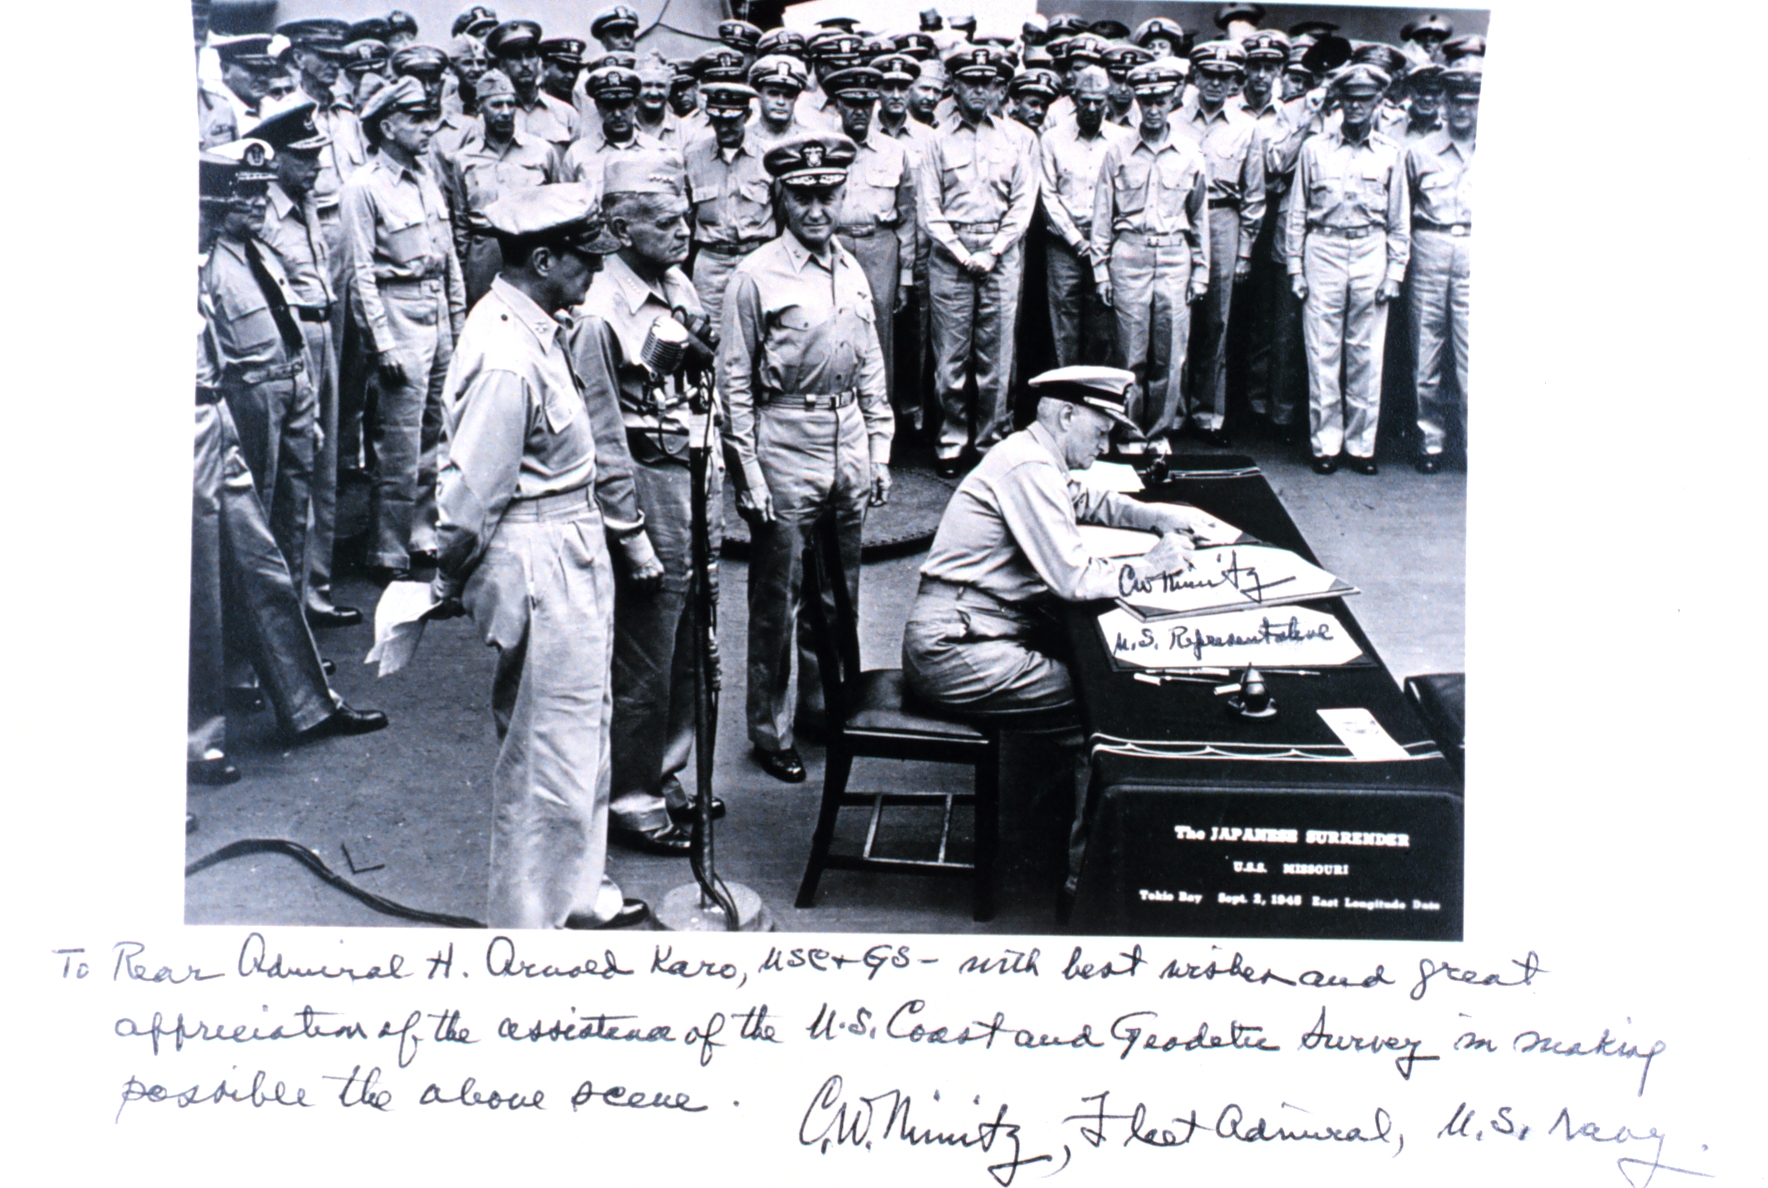 Admiral Chester Nimitz signing the Japanese surrender document with a personal note and signature below, which reads, "To Rear Admiral H. Arnold Karo, USC&GS - with best wishes and great appreciation of the assistance of the U.S. Coast and Geodetic Survey in making possible the above scene. C.W. Nimitz, Fleet Admiral, U.S. Navy.”